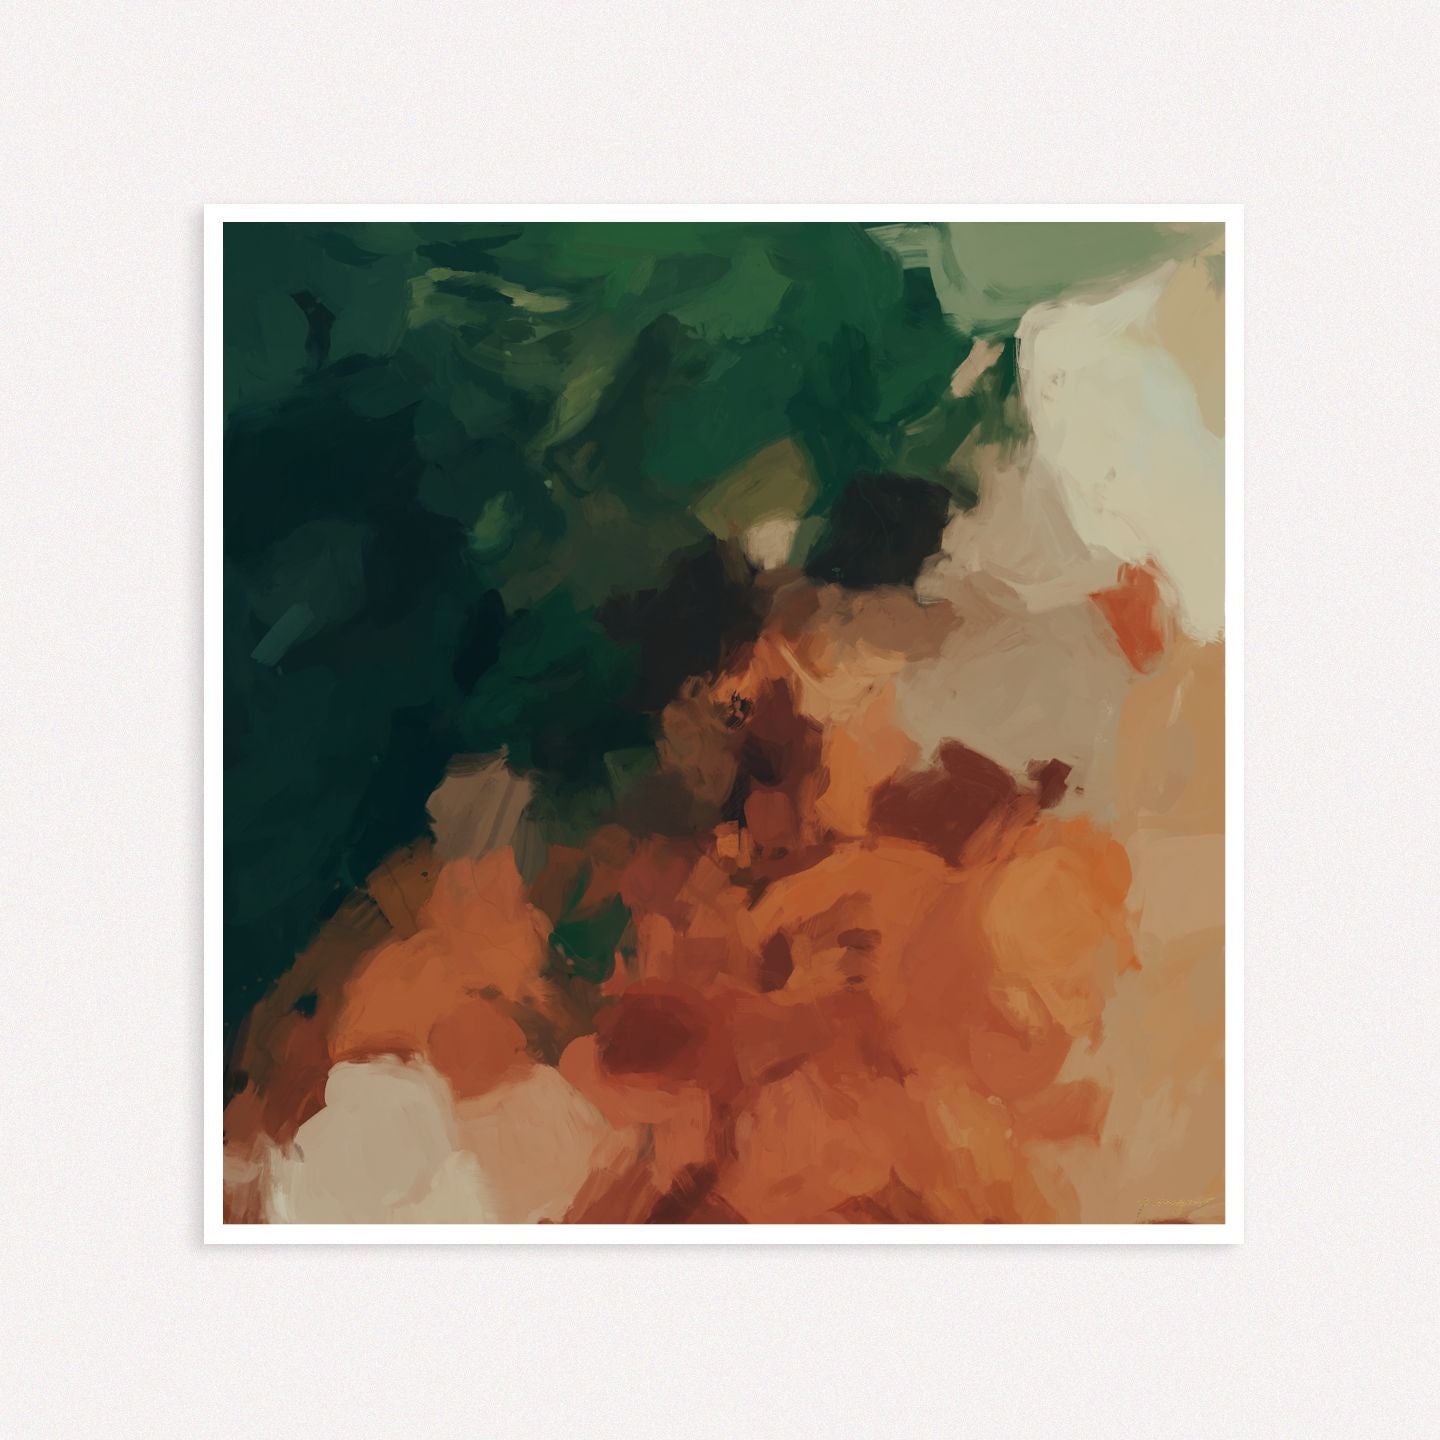 Cedar, green and orange colorful abstract wall art print by Parima Studio